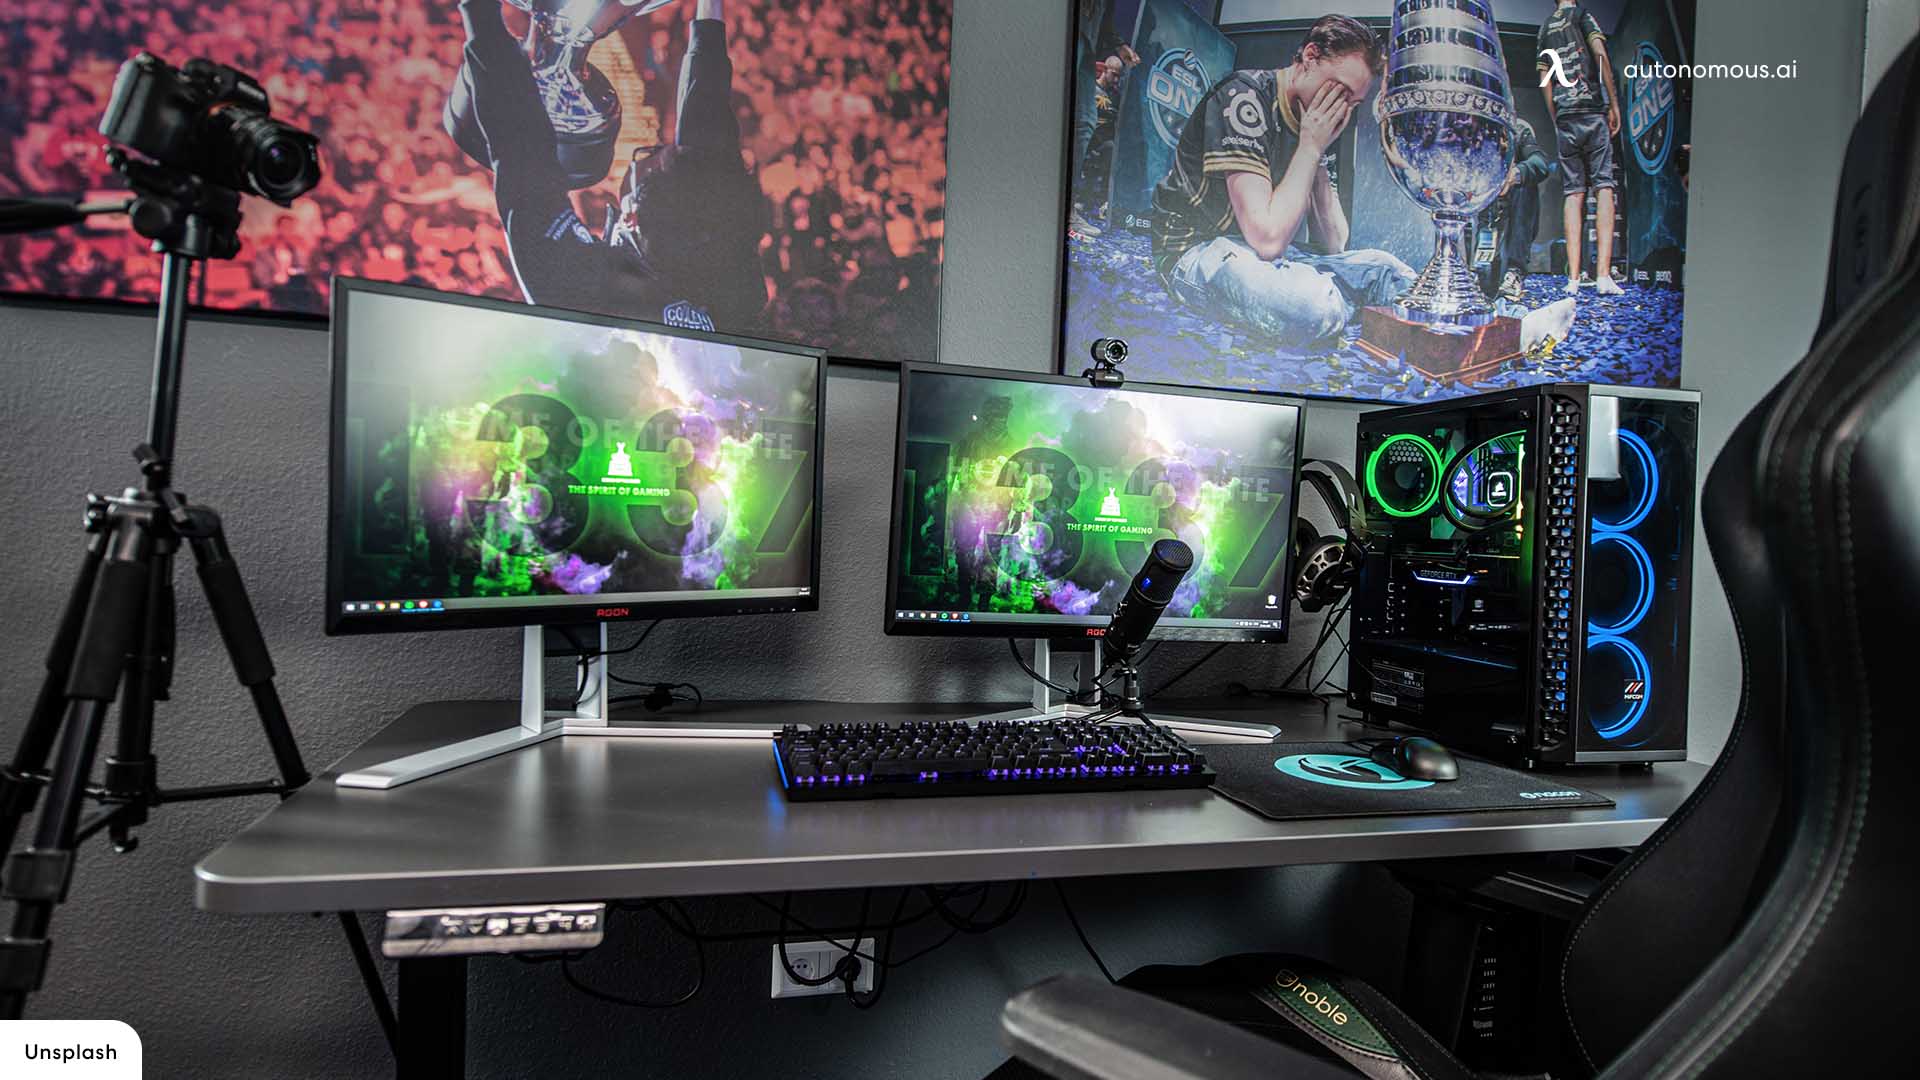 How to Have a Clean Gaming Setup?